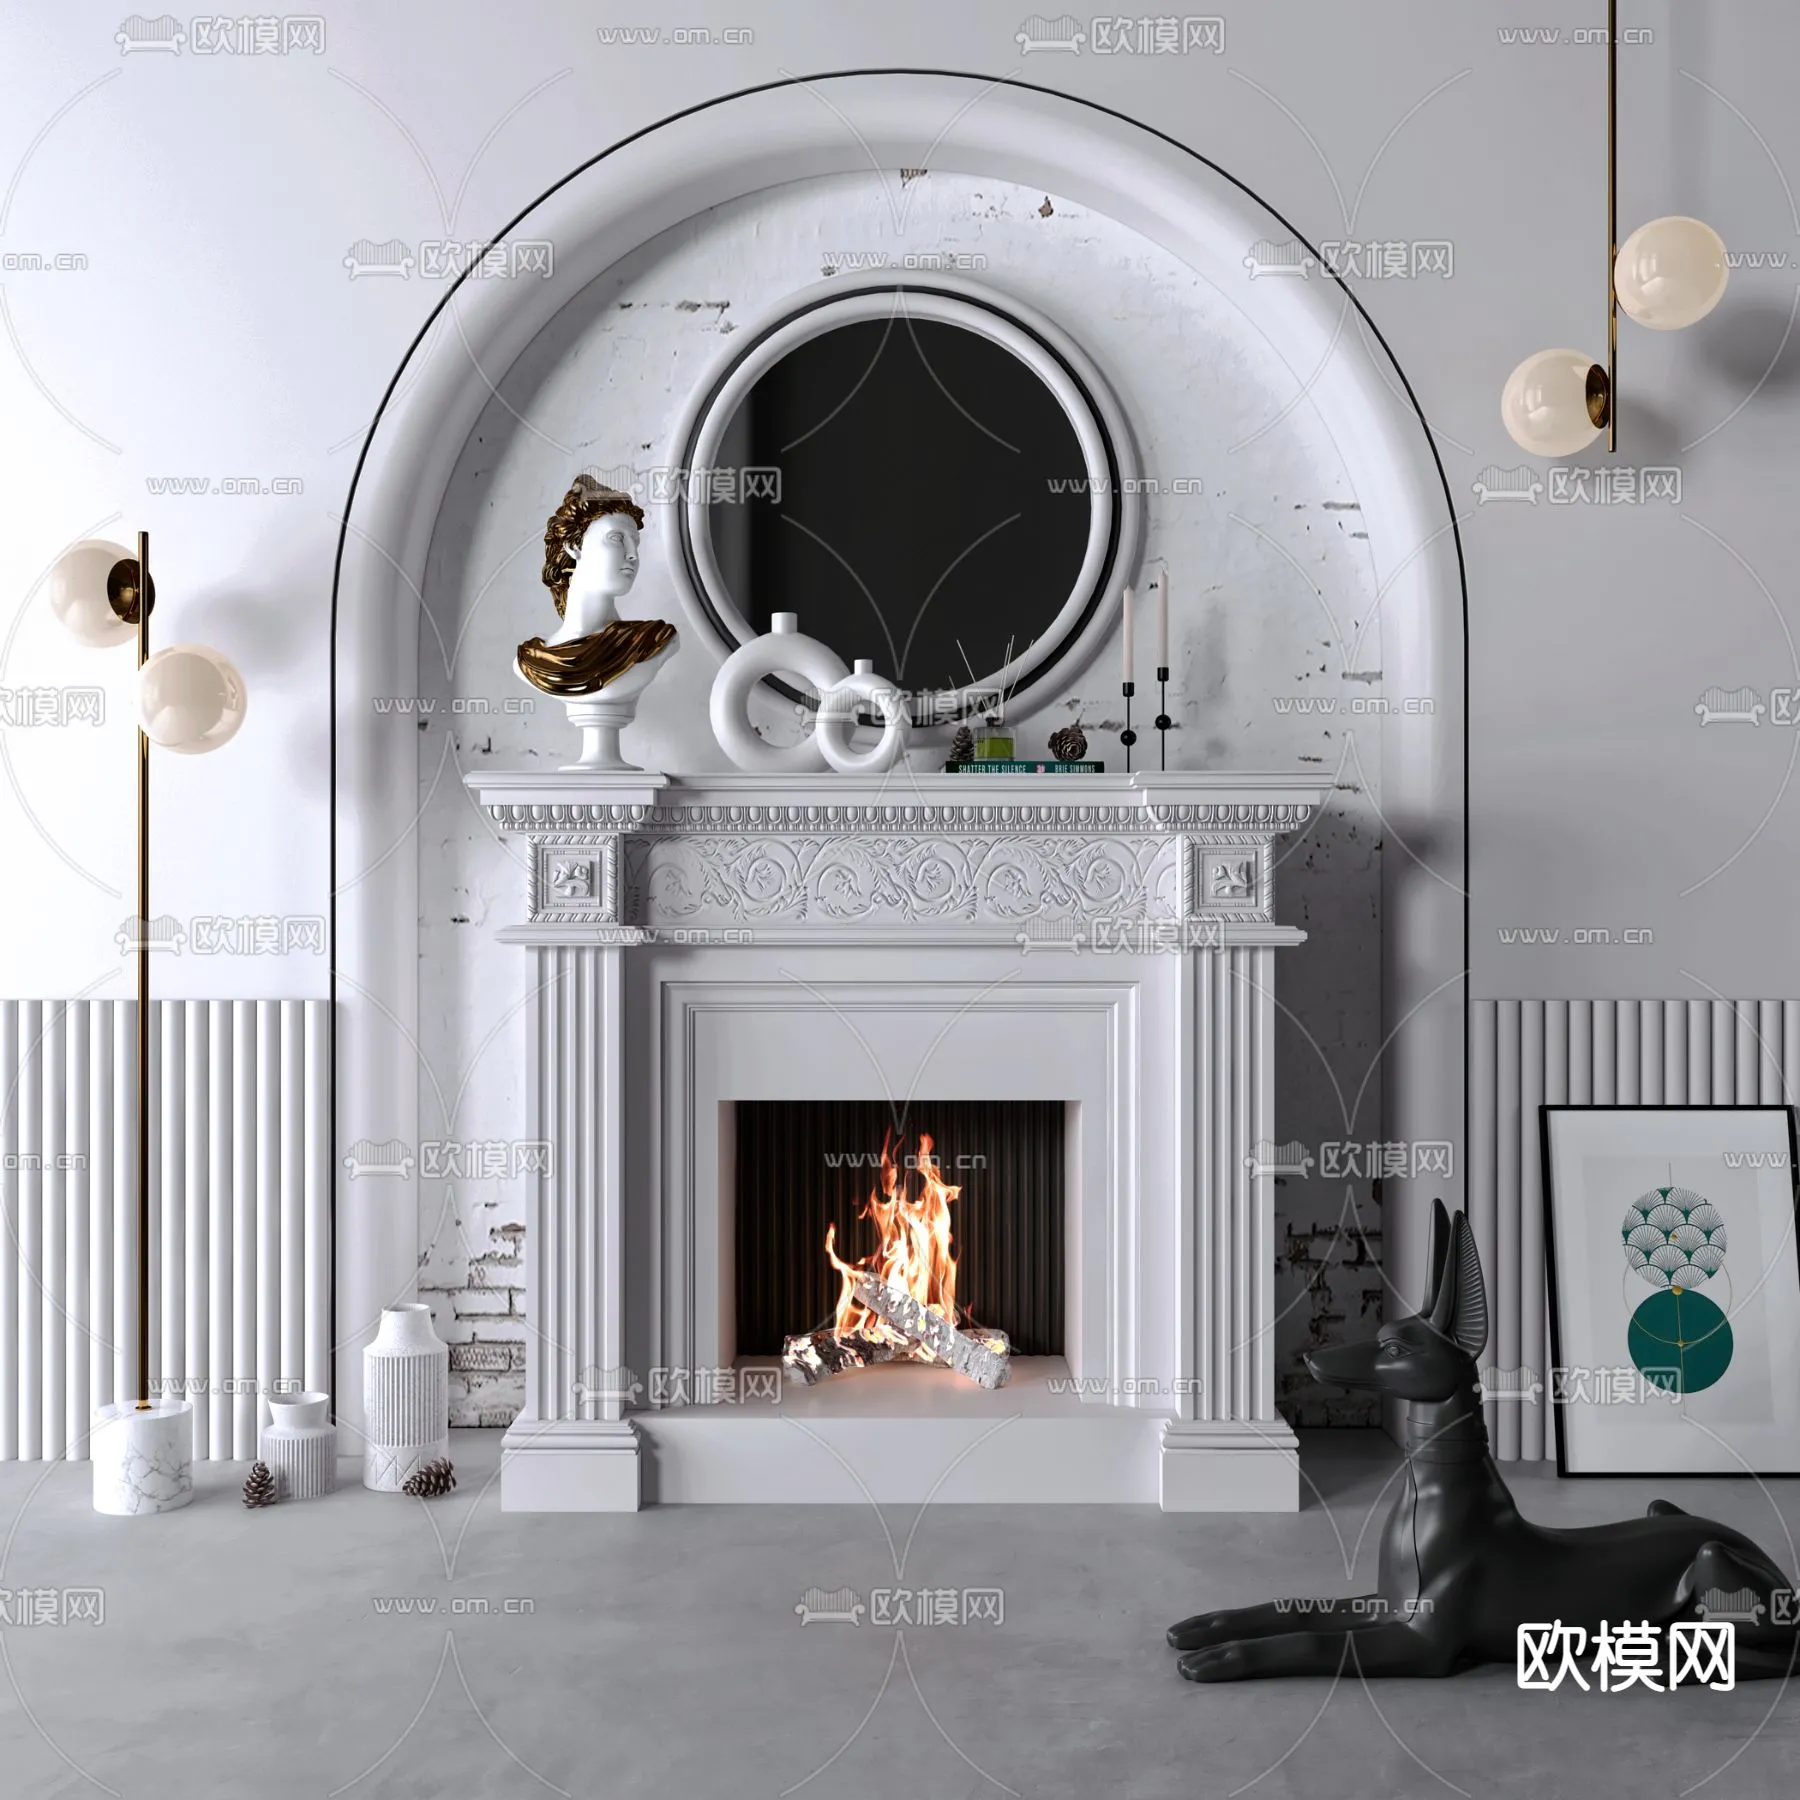 CLASSIC – FIREPLACE 3DMODELS – 066